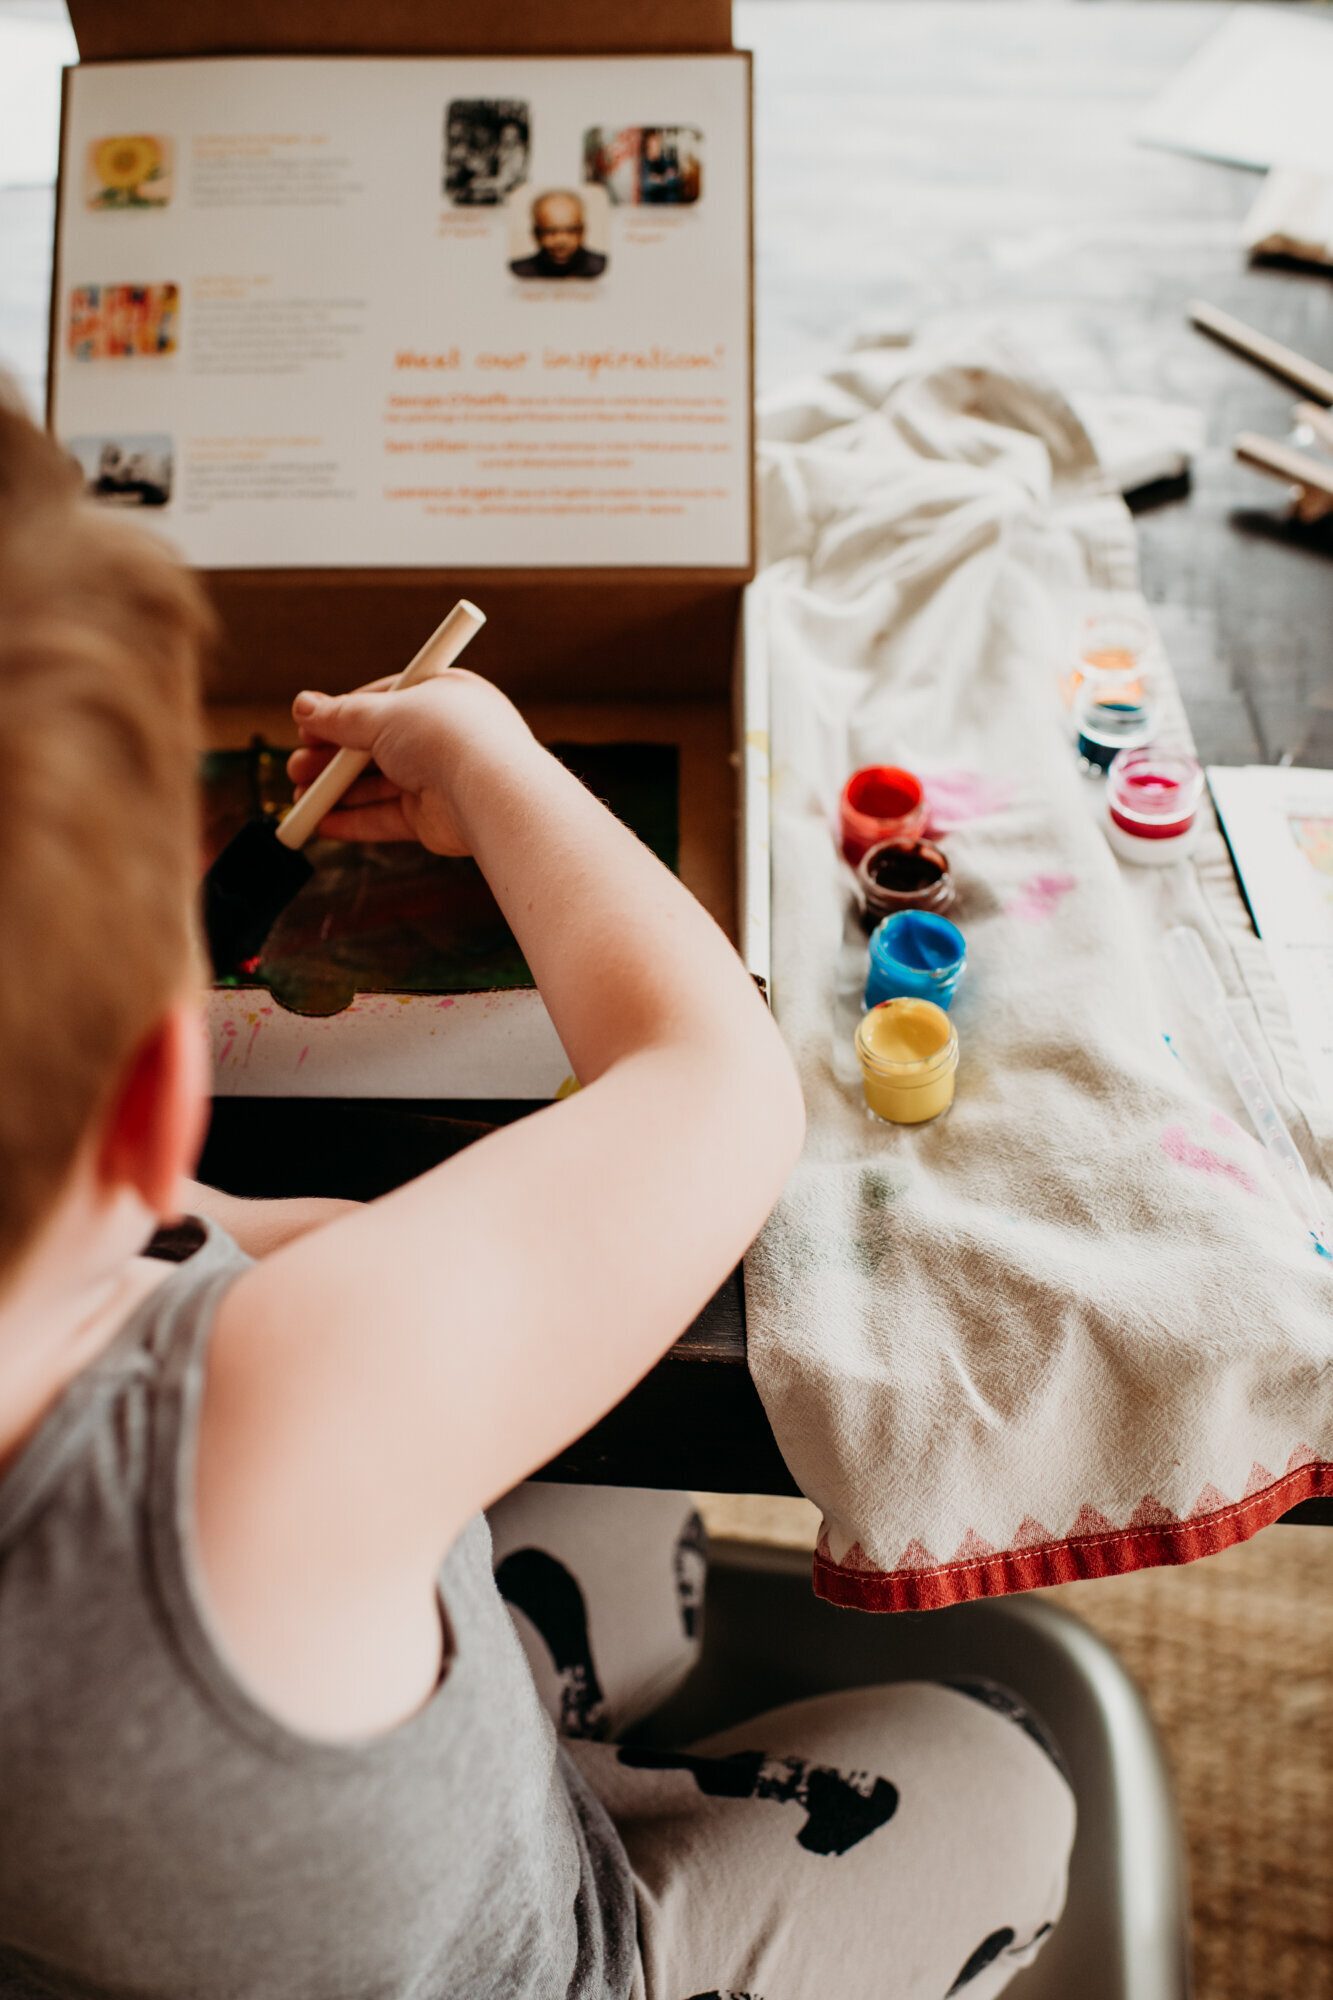 Branding Photographer, a young boy holds a sponge paint brush with paints beside him on the table